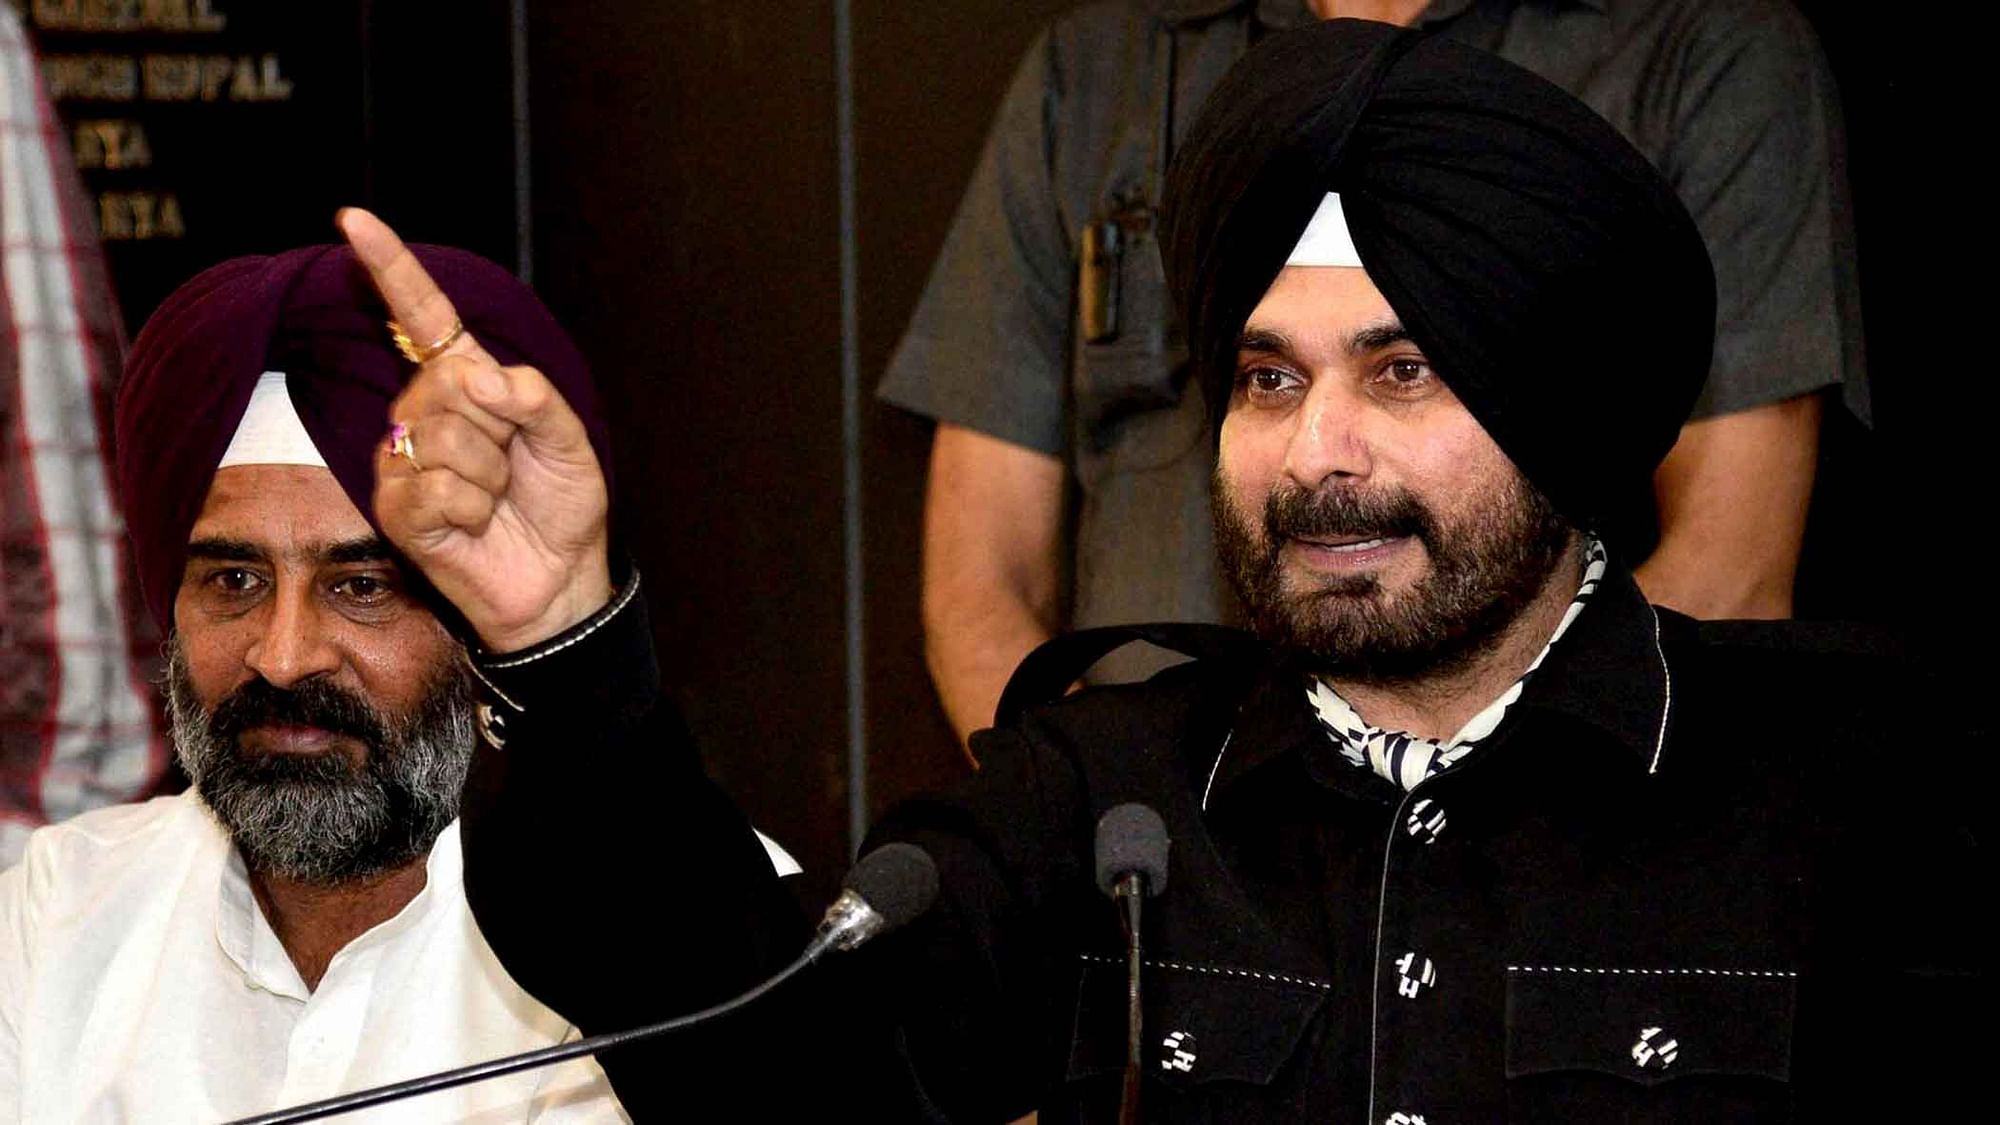 The notice seeks Punjab Minister Navjot Singh Sidhu to “tender an unconditional public apology.”